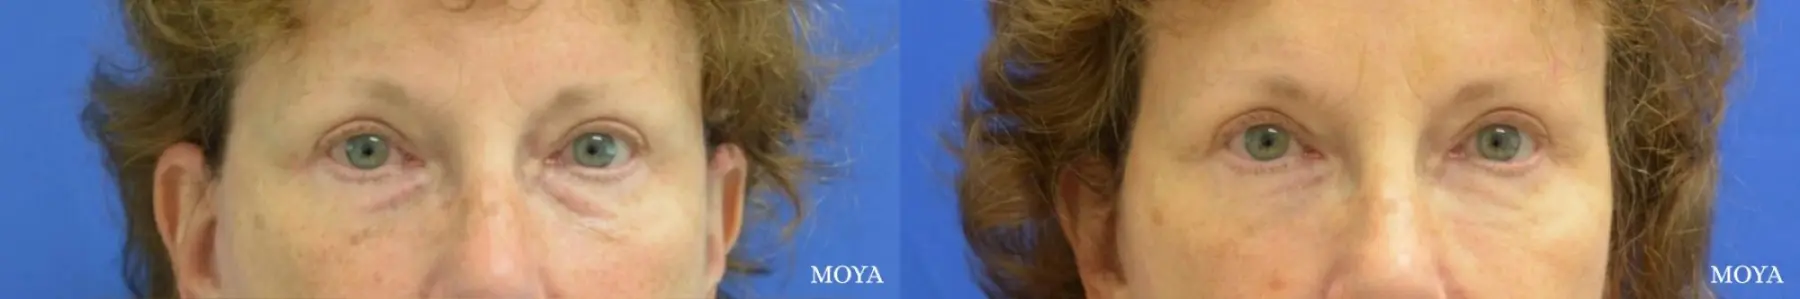 Fillers: Patient 7 - Before and After 1